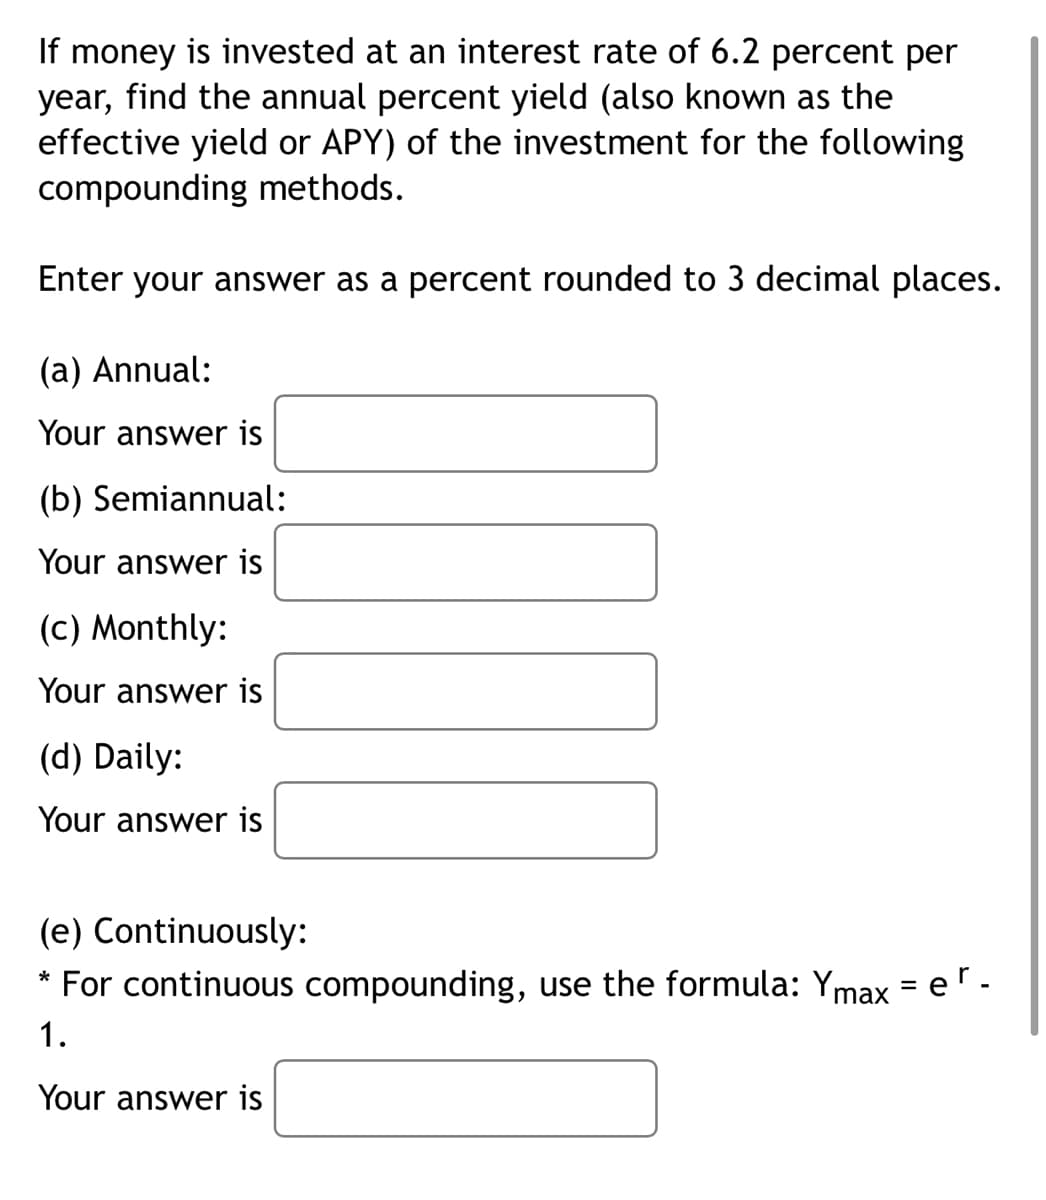 If money is invested at an interest rate of 6.2 percent per
year, find the annual percent yield (also known as the
effective yield or APY) of the investment for the following
compounding methods.
Enter your answer as a percent rounded to 3 decimal places.
(a) Annual:
Your answer is
(b) Semiannual:
Your answer is
(c) Monthly:
Your answer is
(d) Daily:
Your answer is
(e) Continuously:
For continuous compounding, use the formula: Ymax = er -
1.
Your answer is
